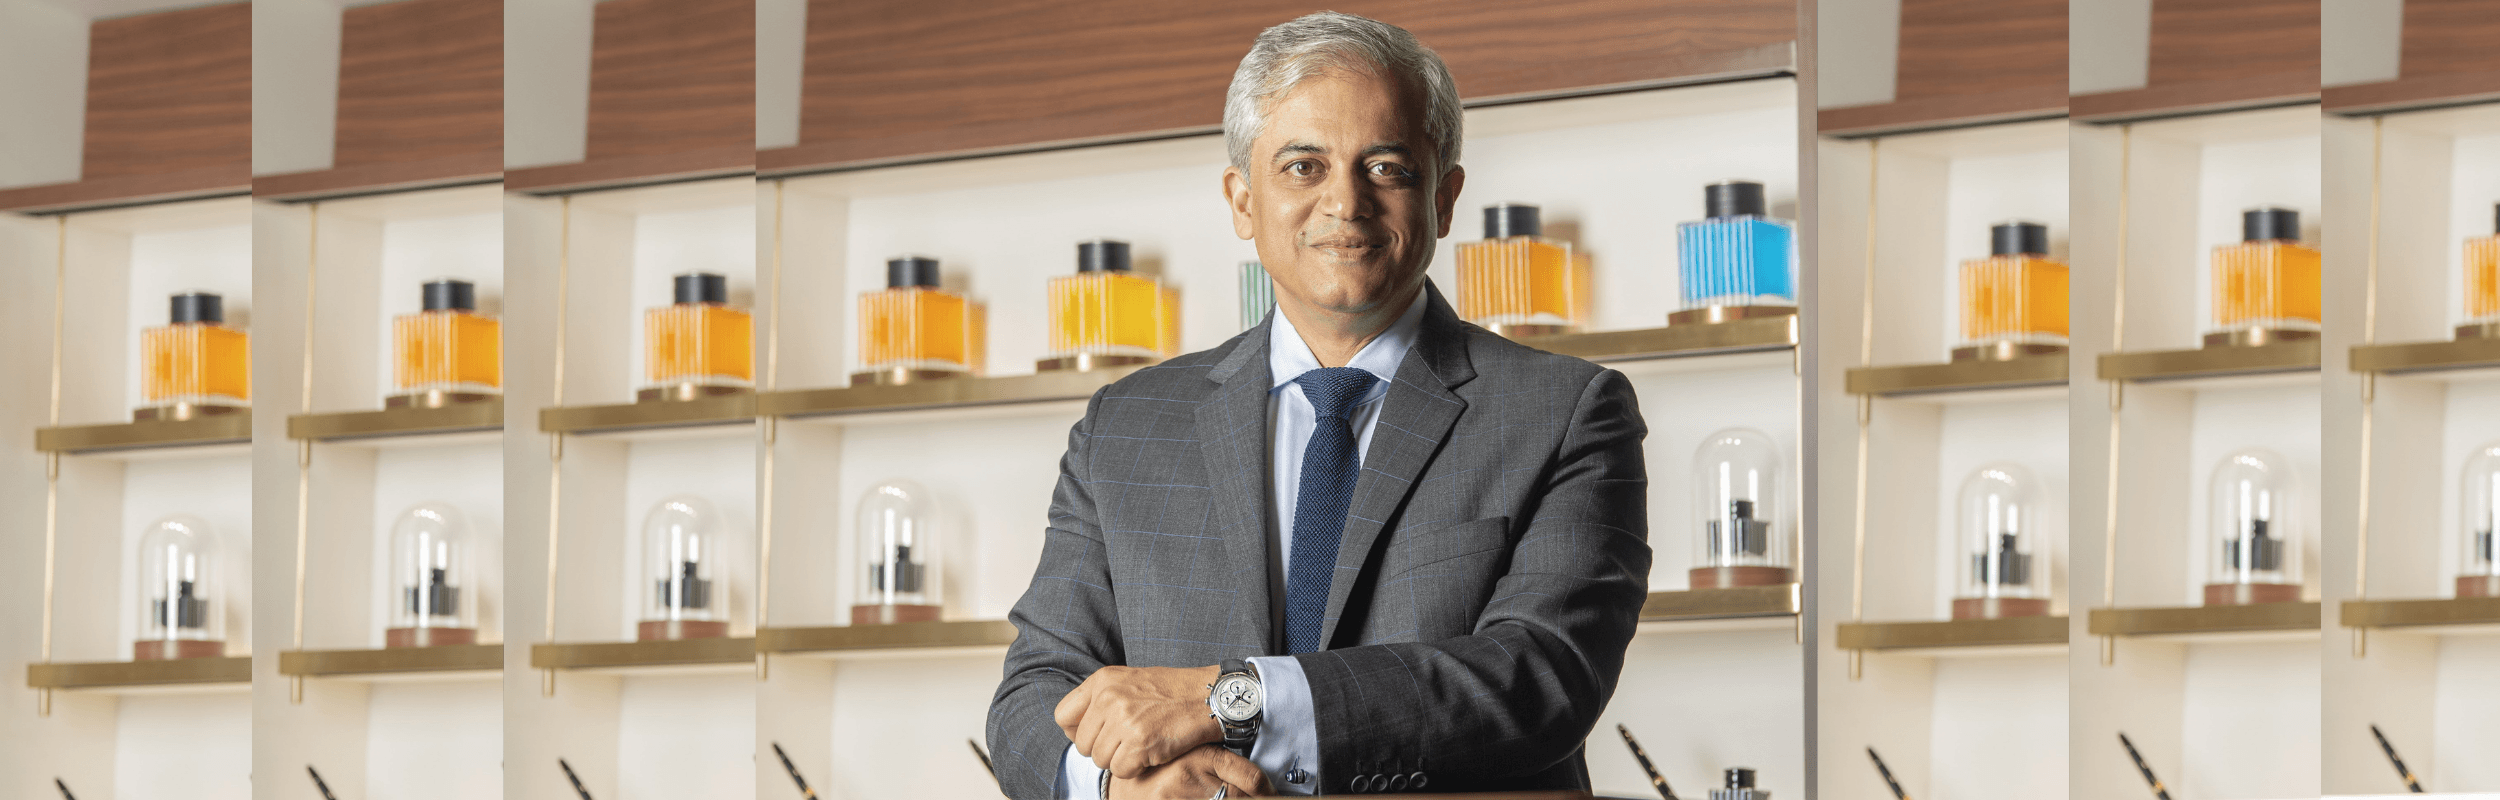 Marking The Hours With Neeraj Walia, Managing Director & CEO, Montblanc India Retail Private Limited, On Changing Perceptions And Indian-Market Shifts